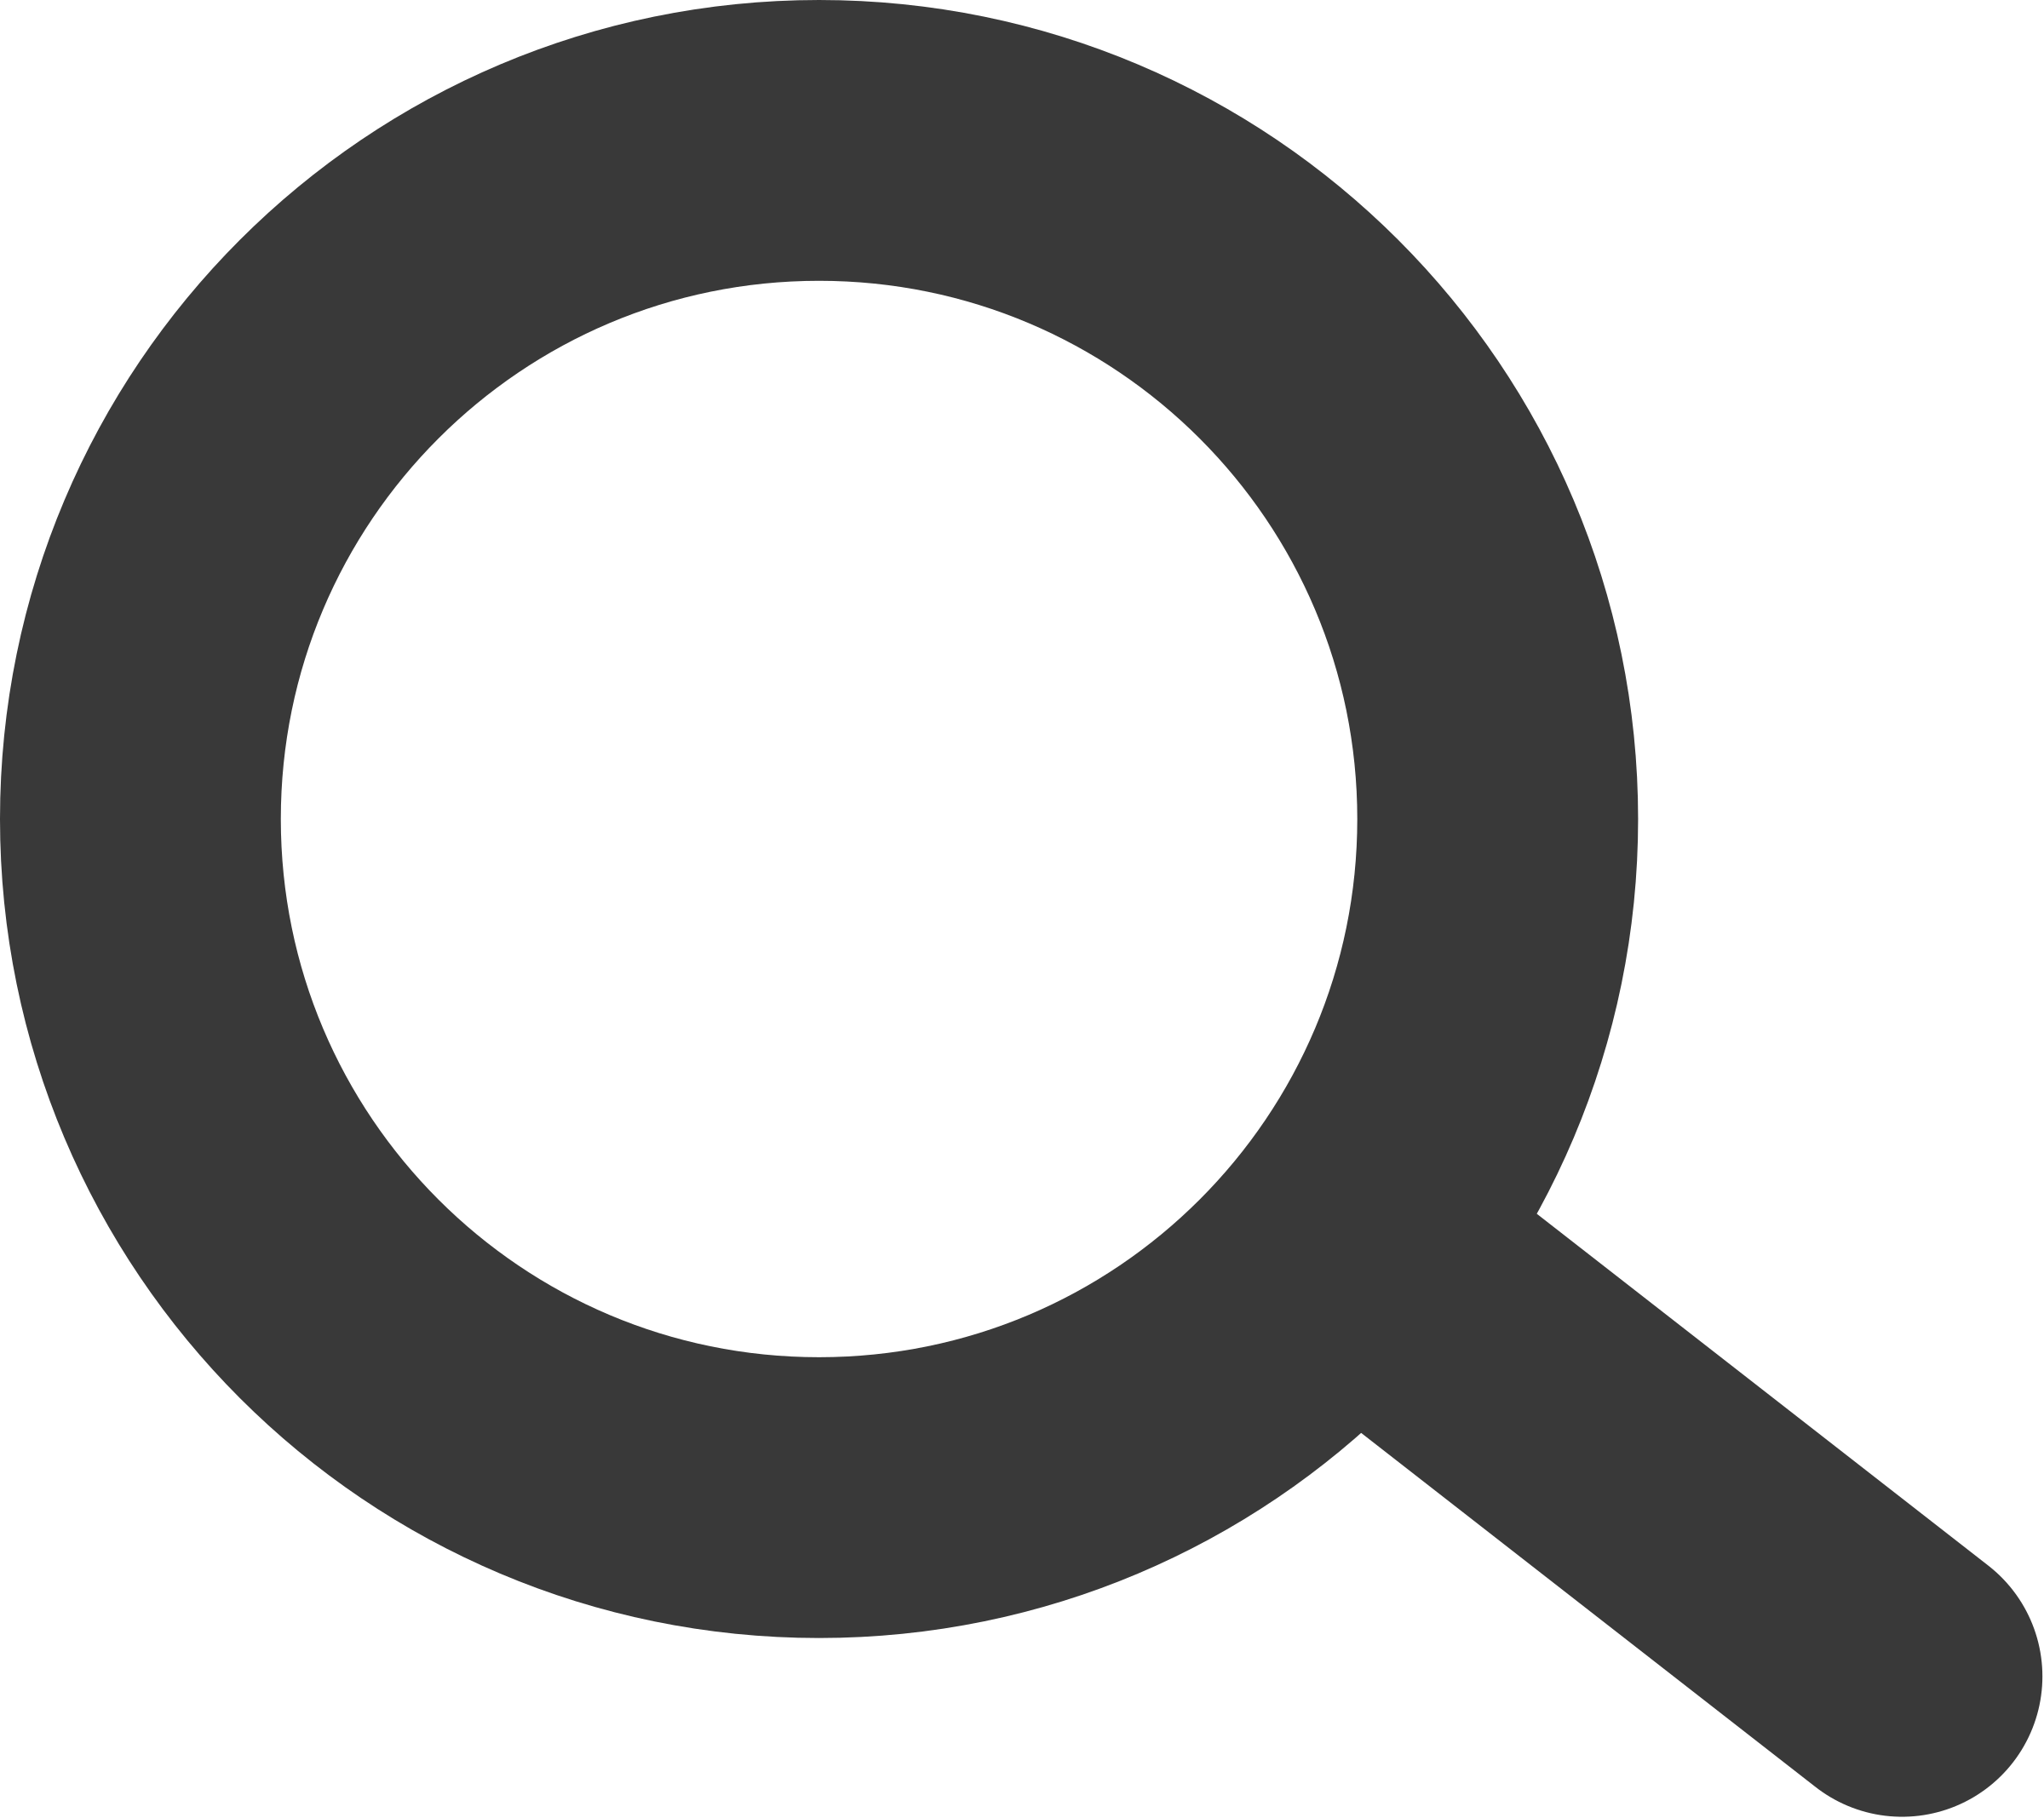 Magnifying glass icon png. Minimal icons free and